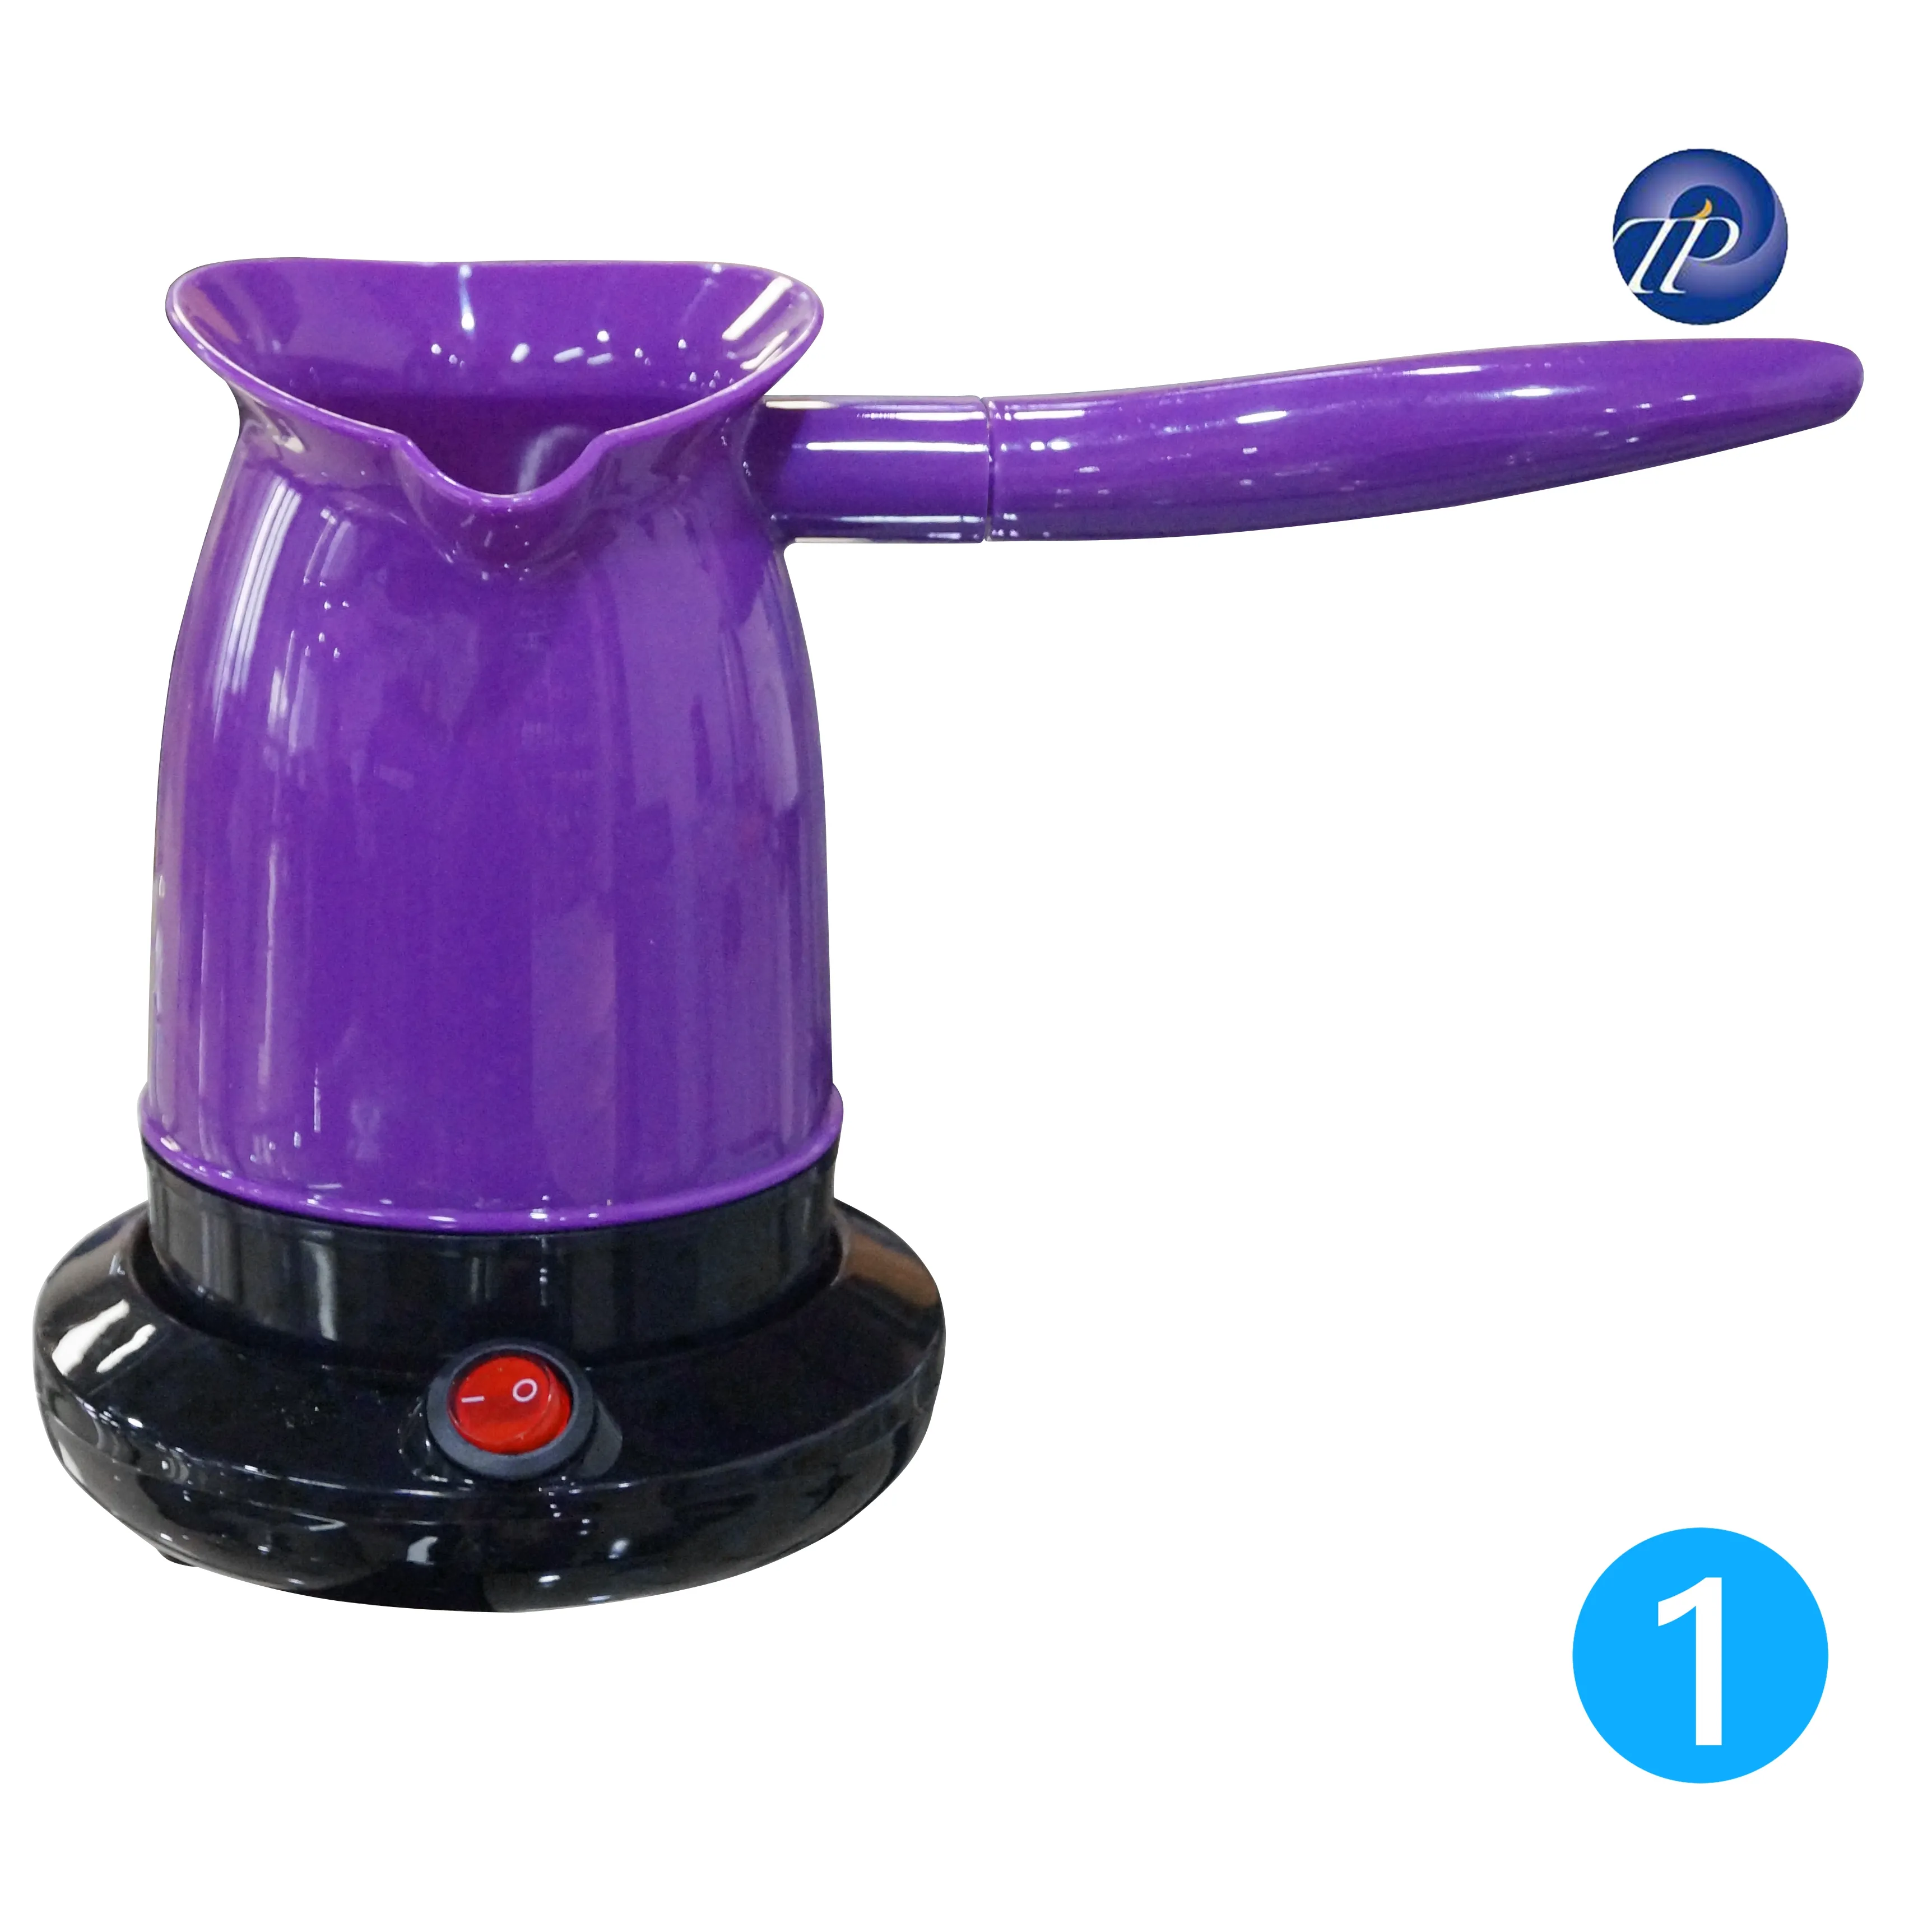 nordic kettle 0.6L Electric coffee kettle purple or other color